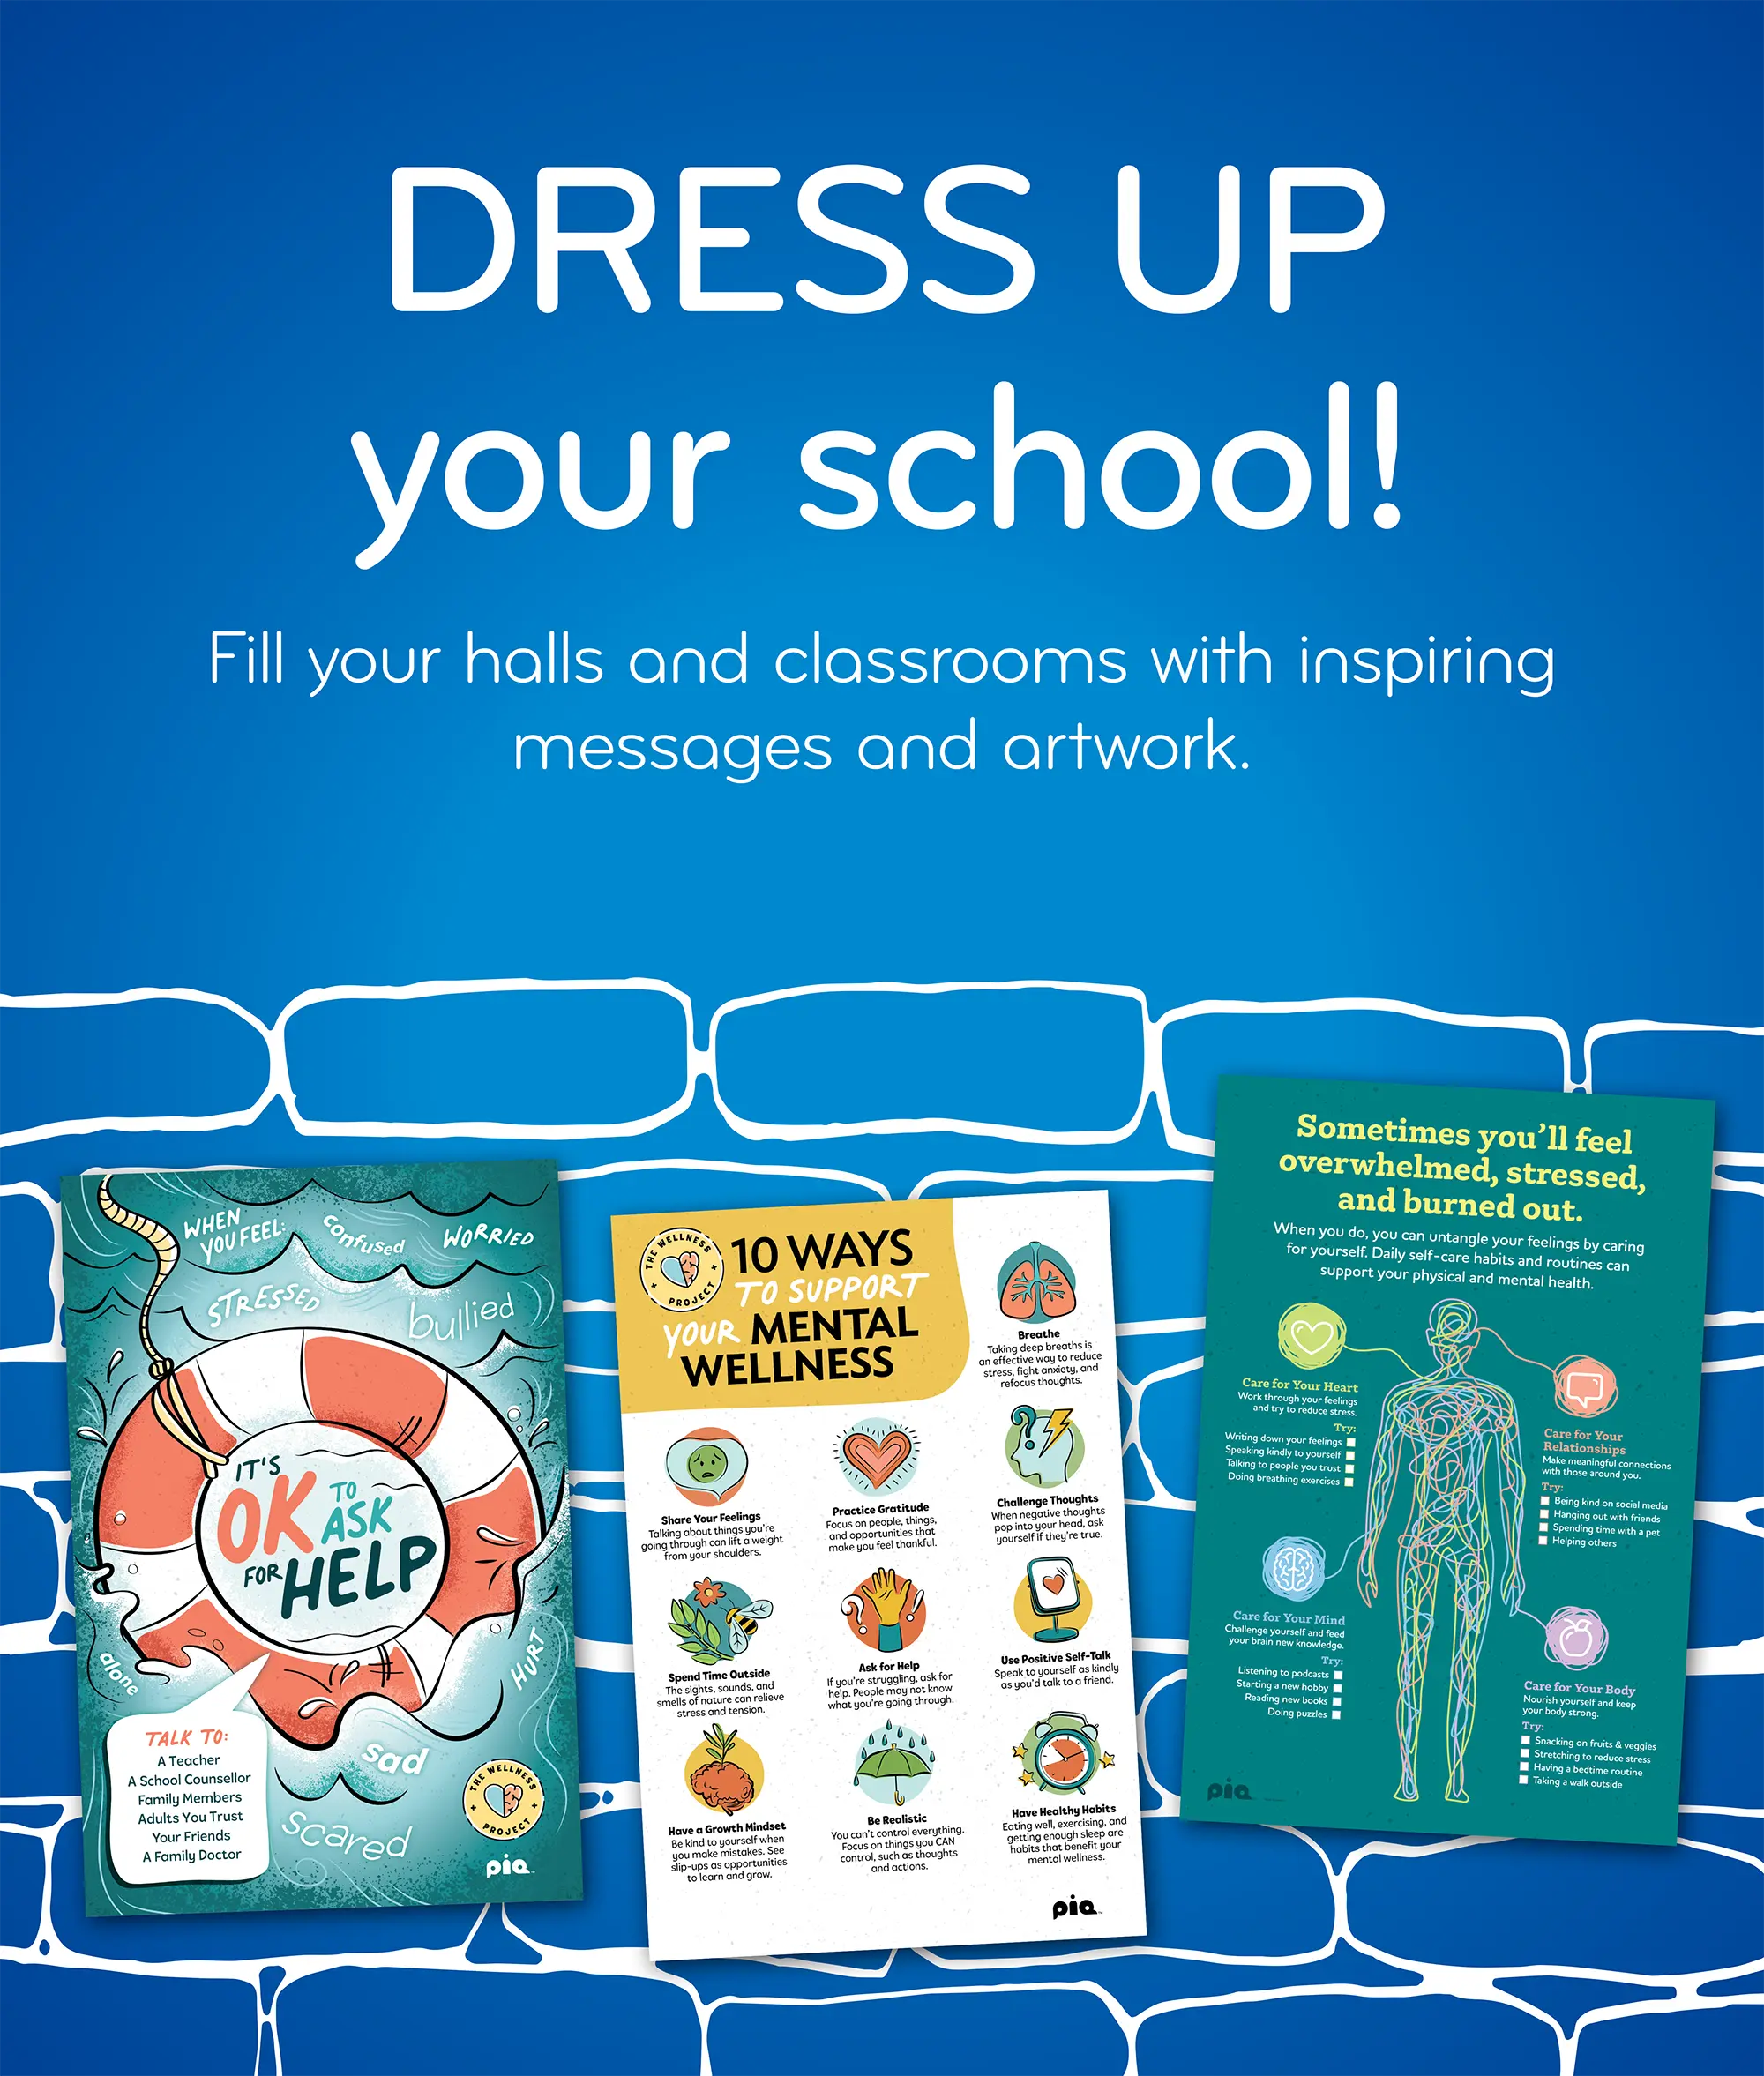 DRESS UP your school! Fill your halls and classrooms with inspiring messages and artwork.